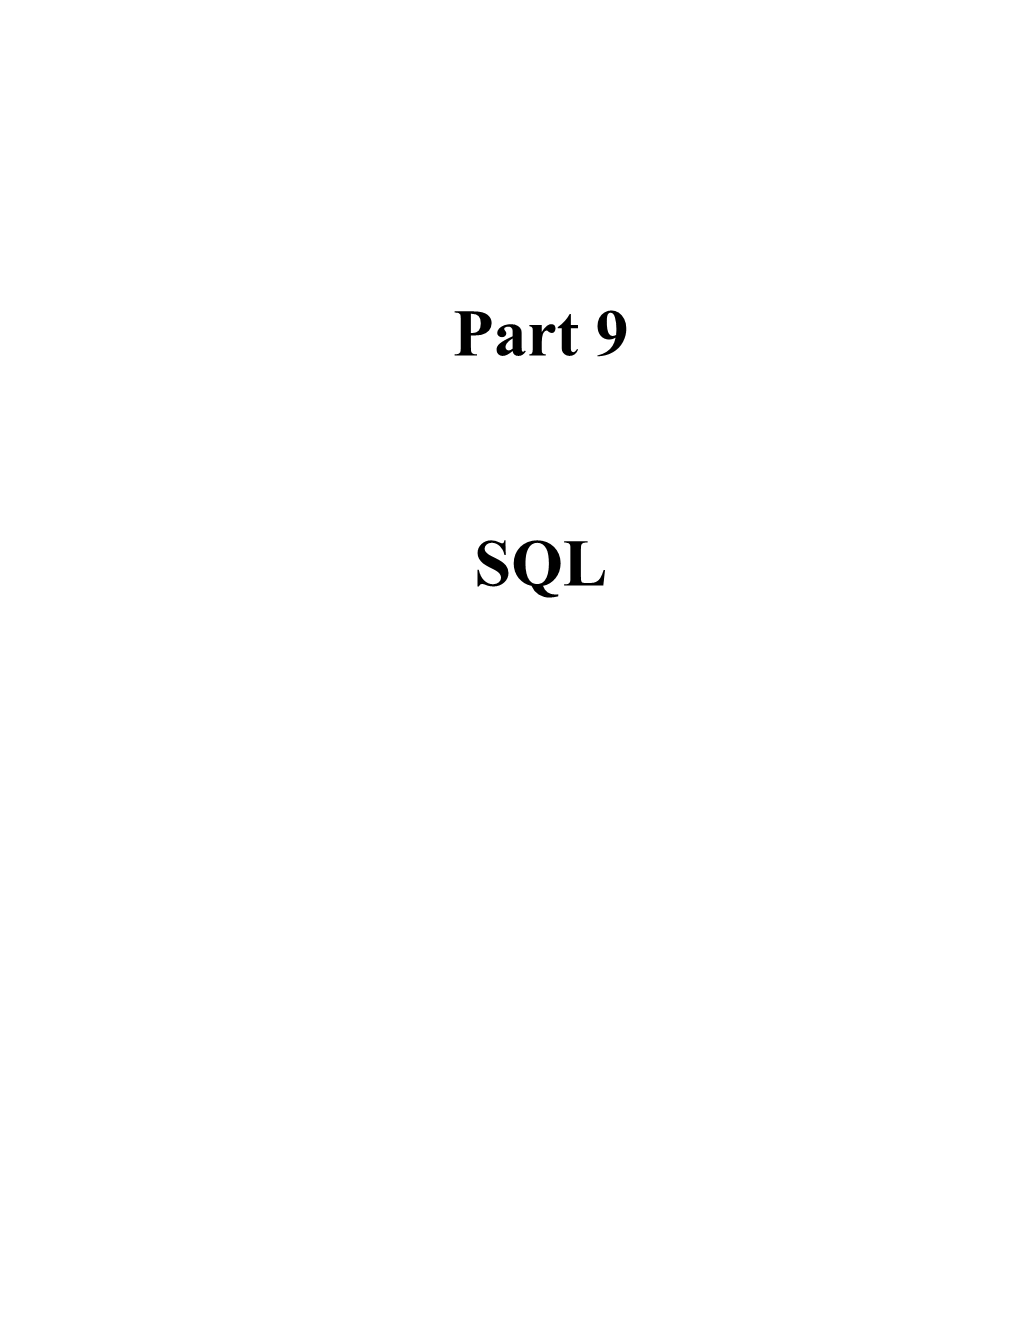 Part 9 - SQL (For Oracle)